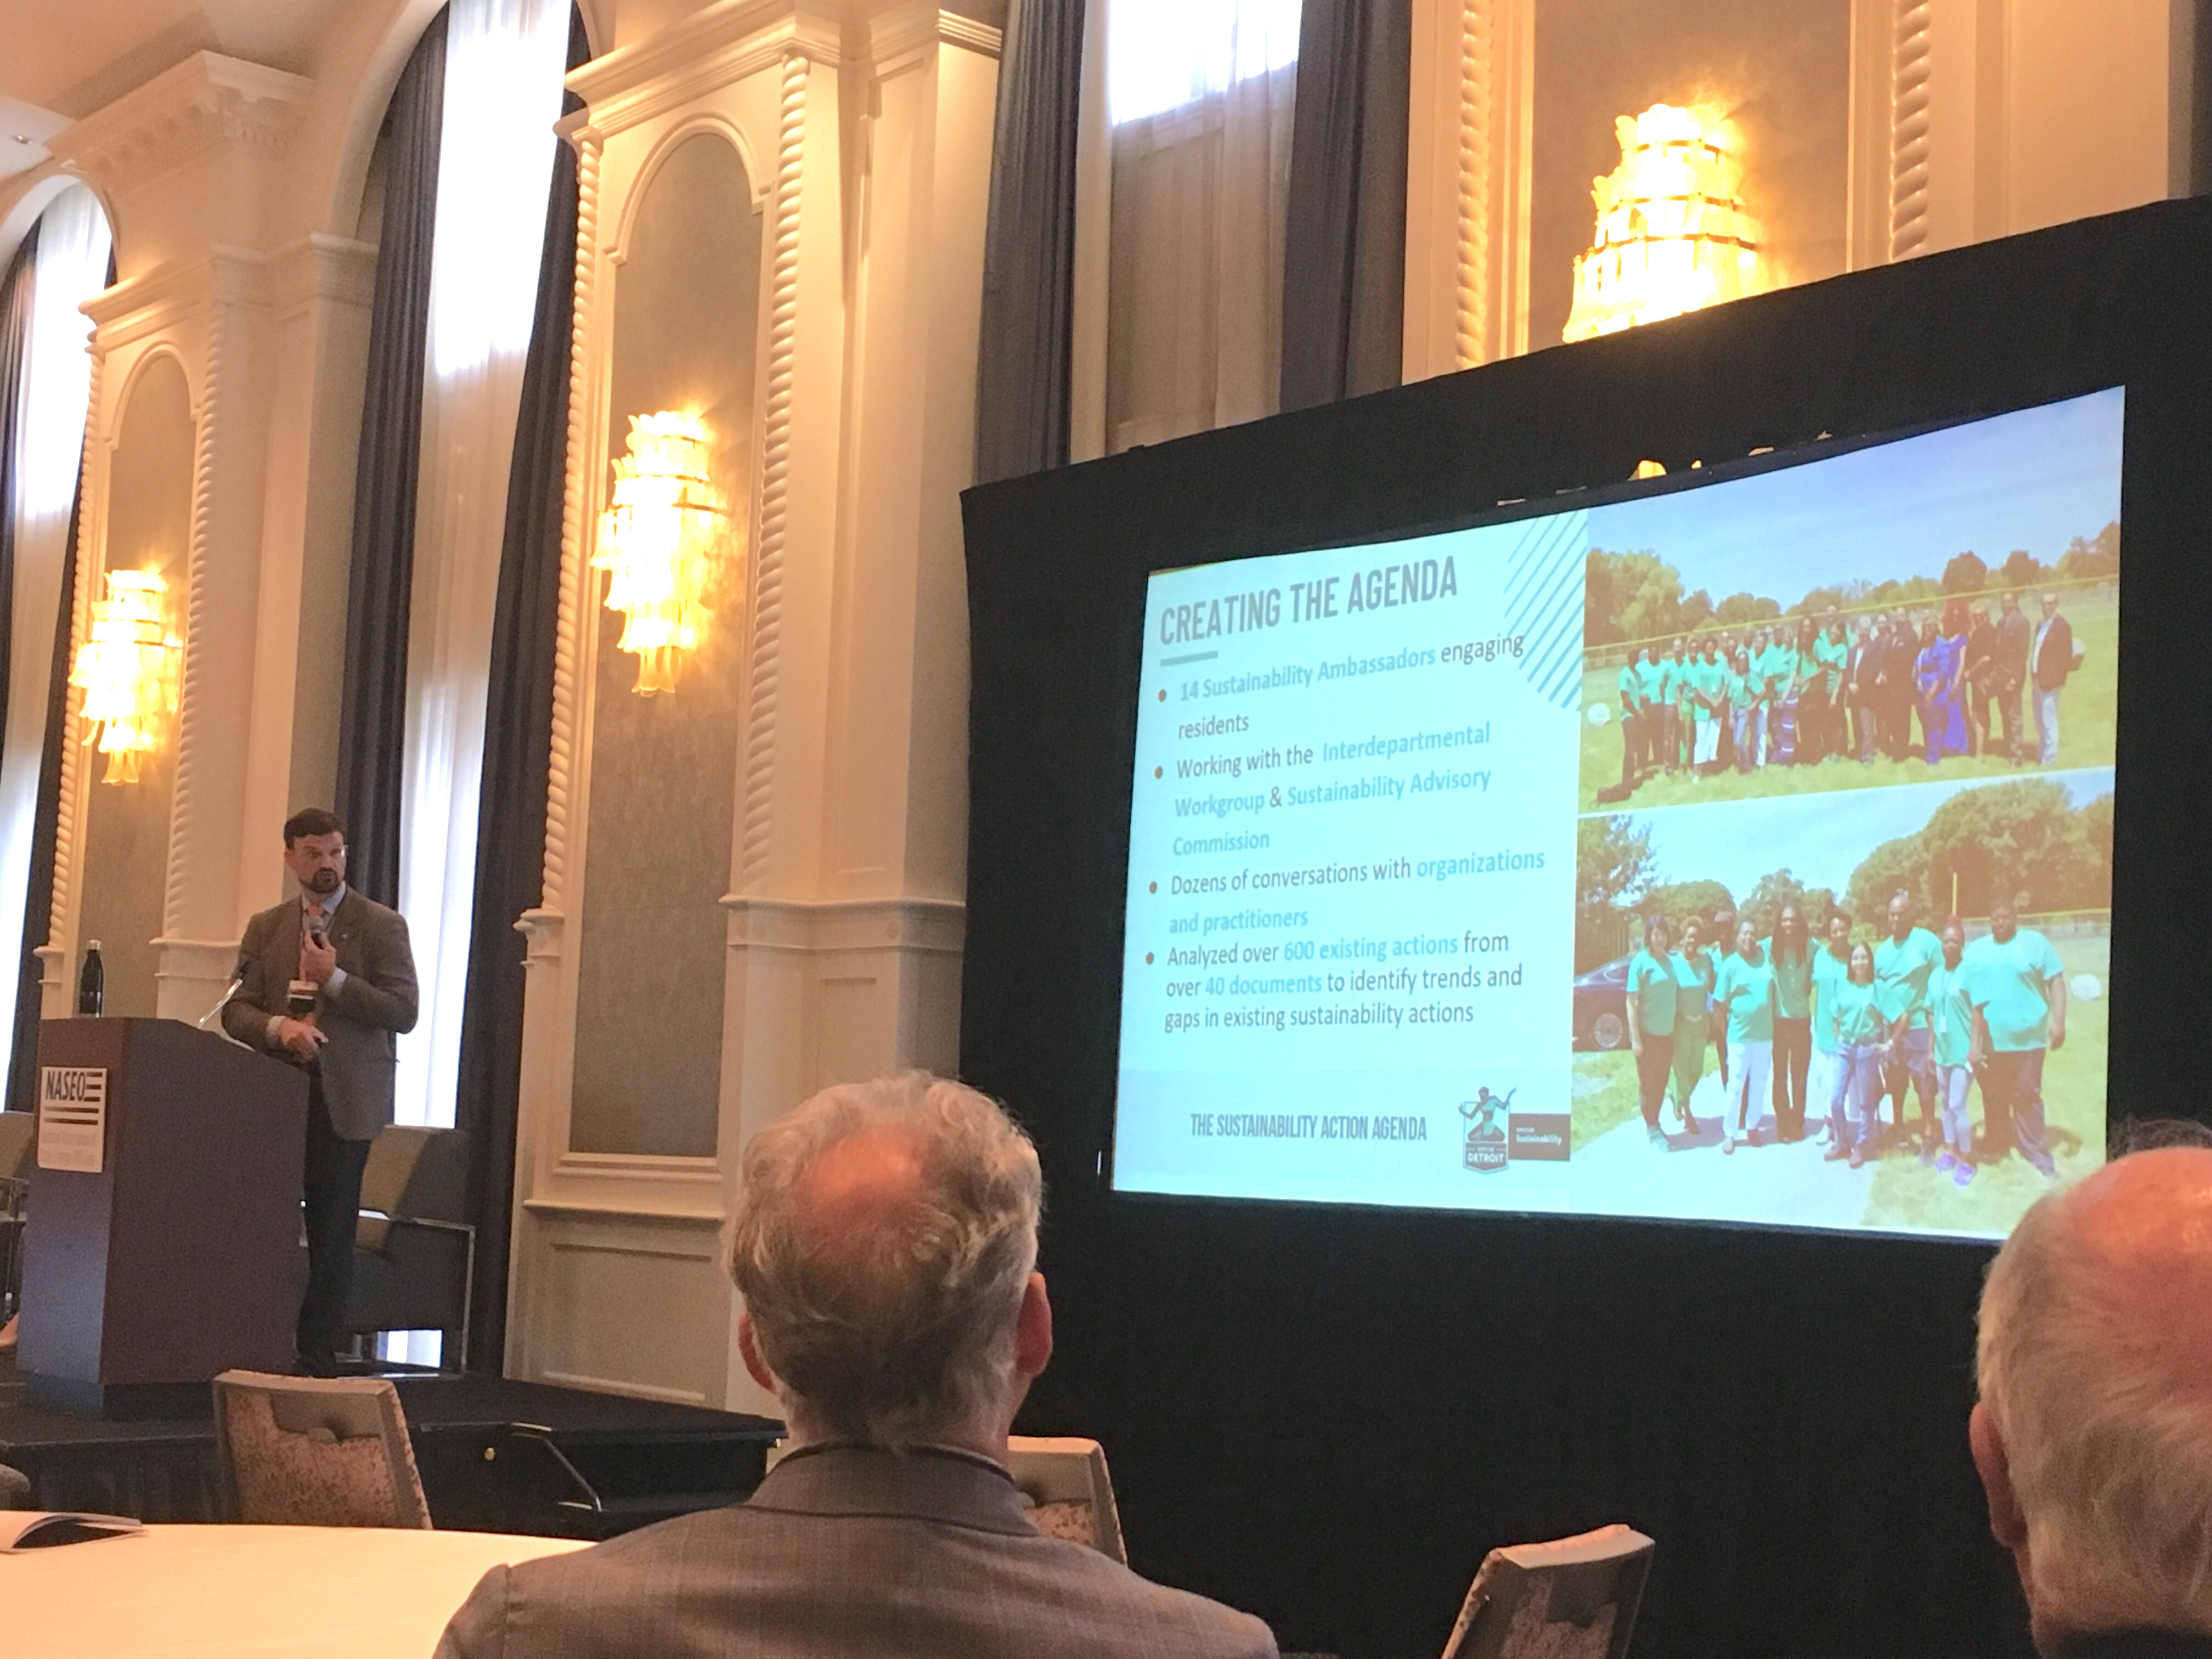 Detroit Sustainability Director Talks Equity, Environment, and Economy at NASEO Annual Meeting